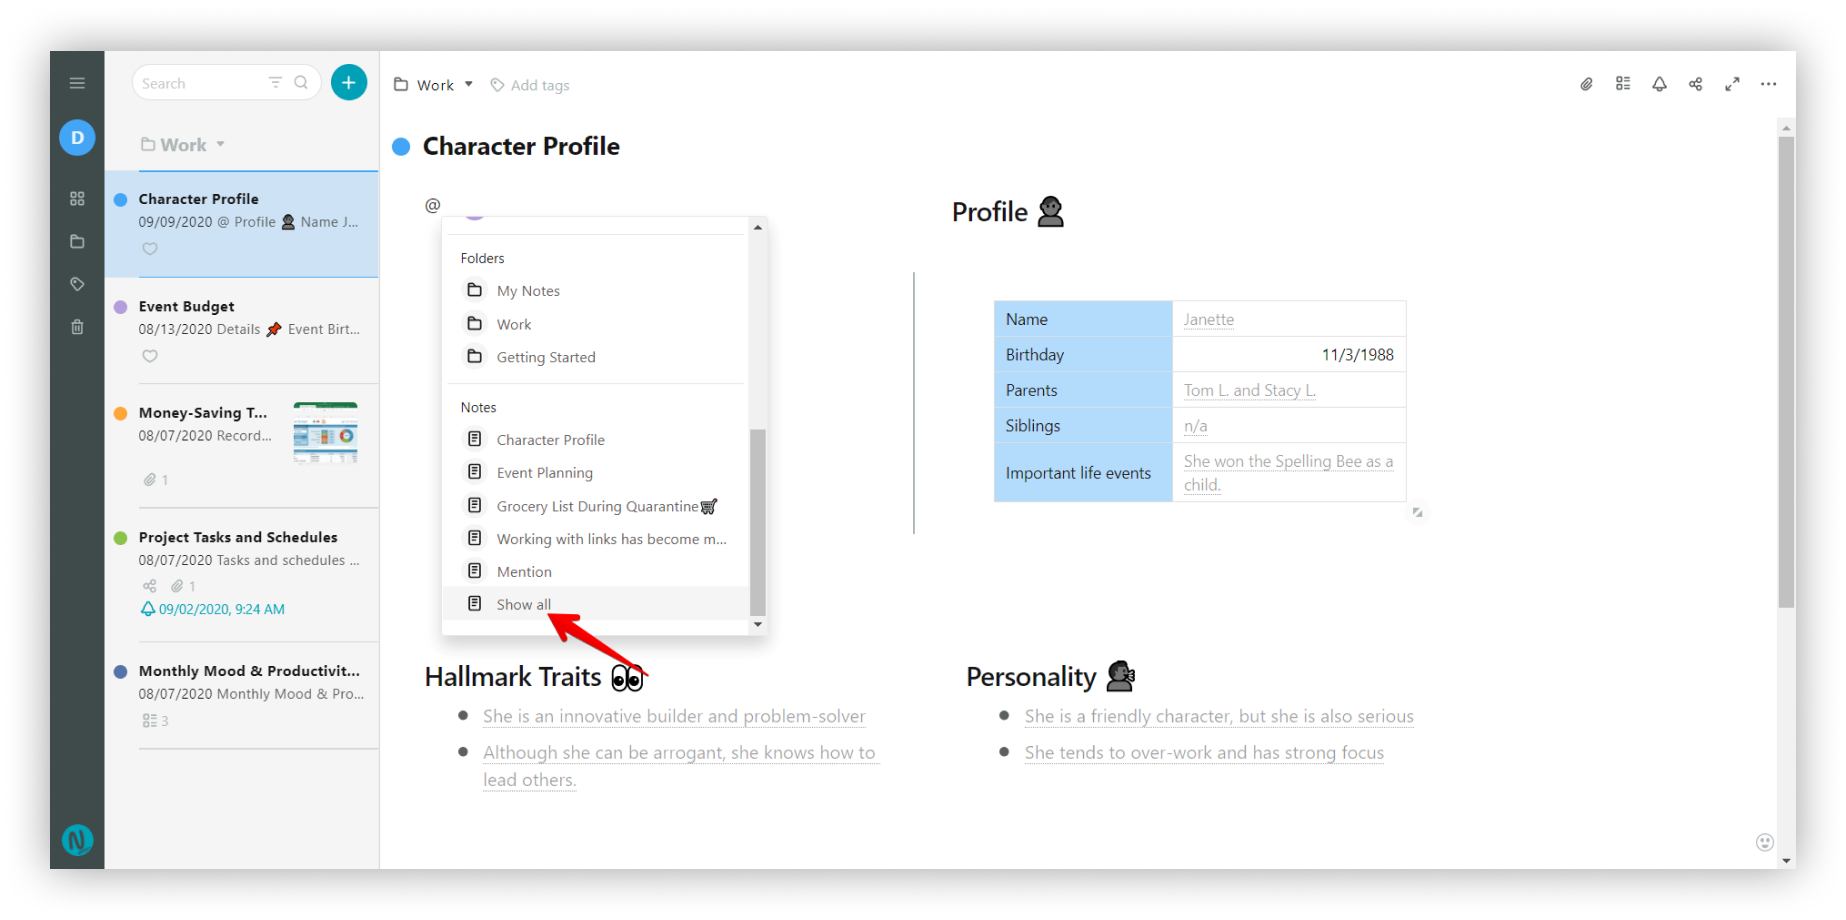 If you have many pages in your workspace, then click Show all to see all of them in the menu.